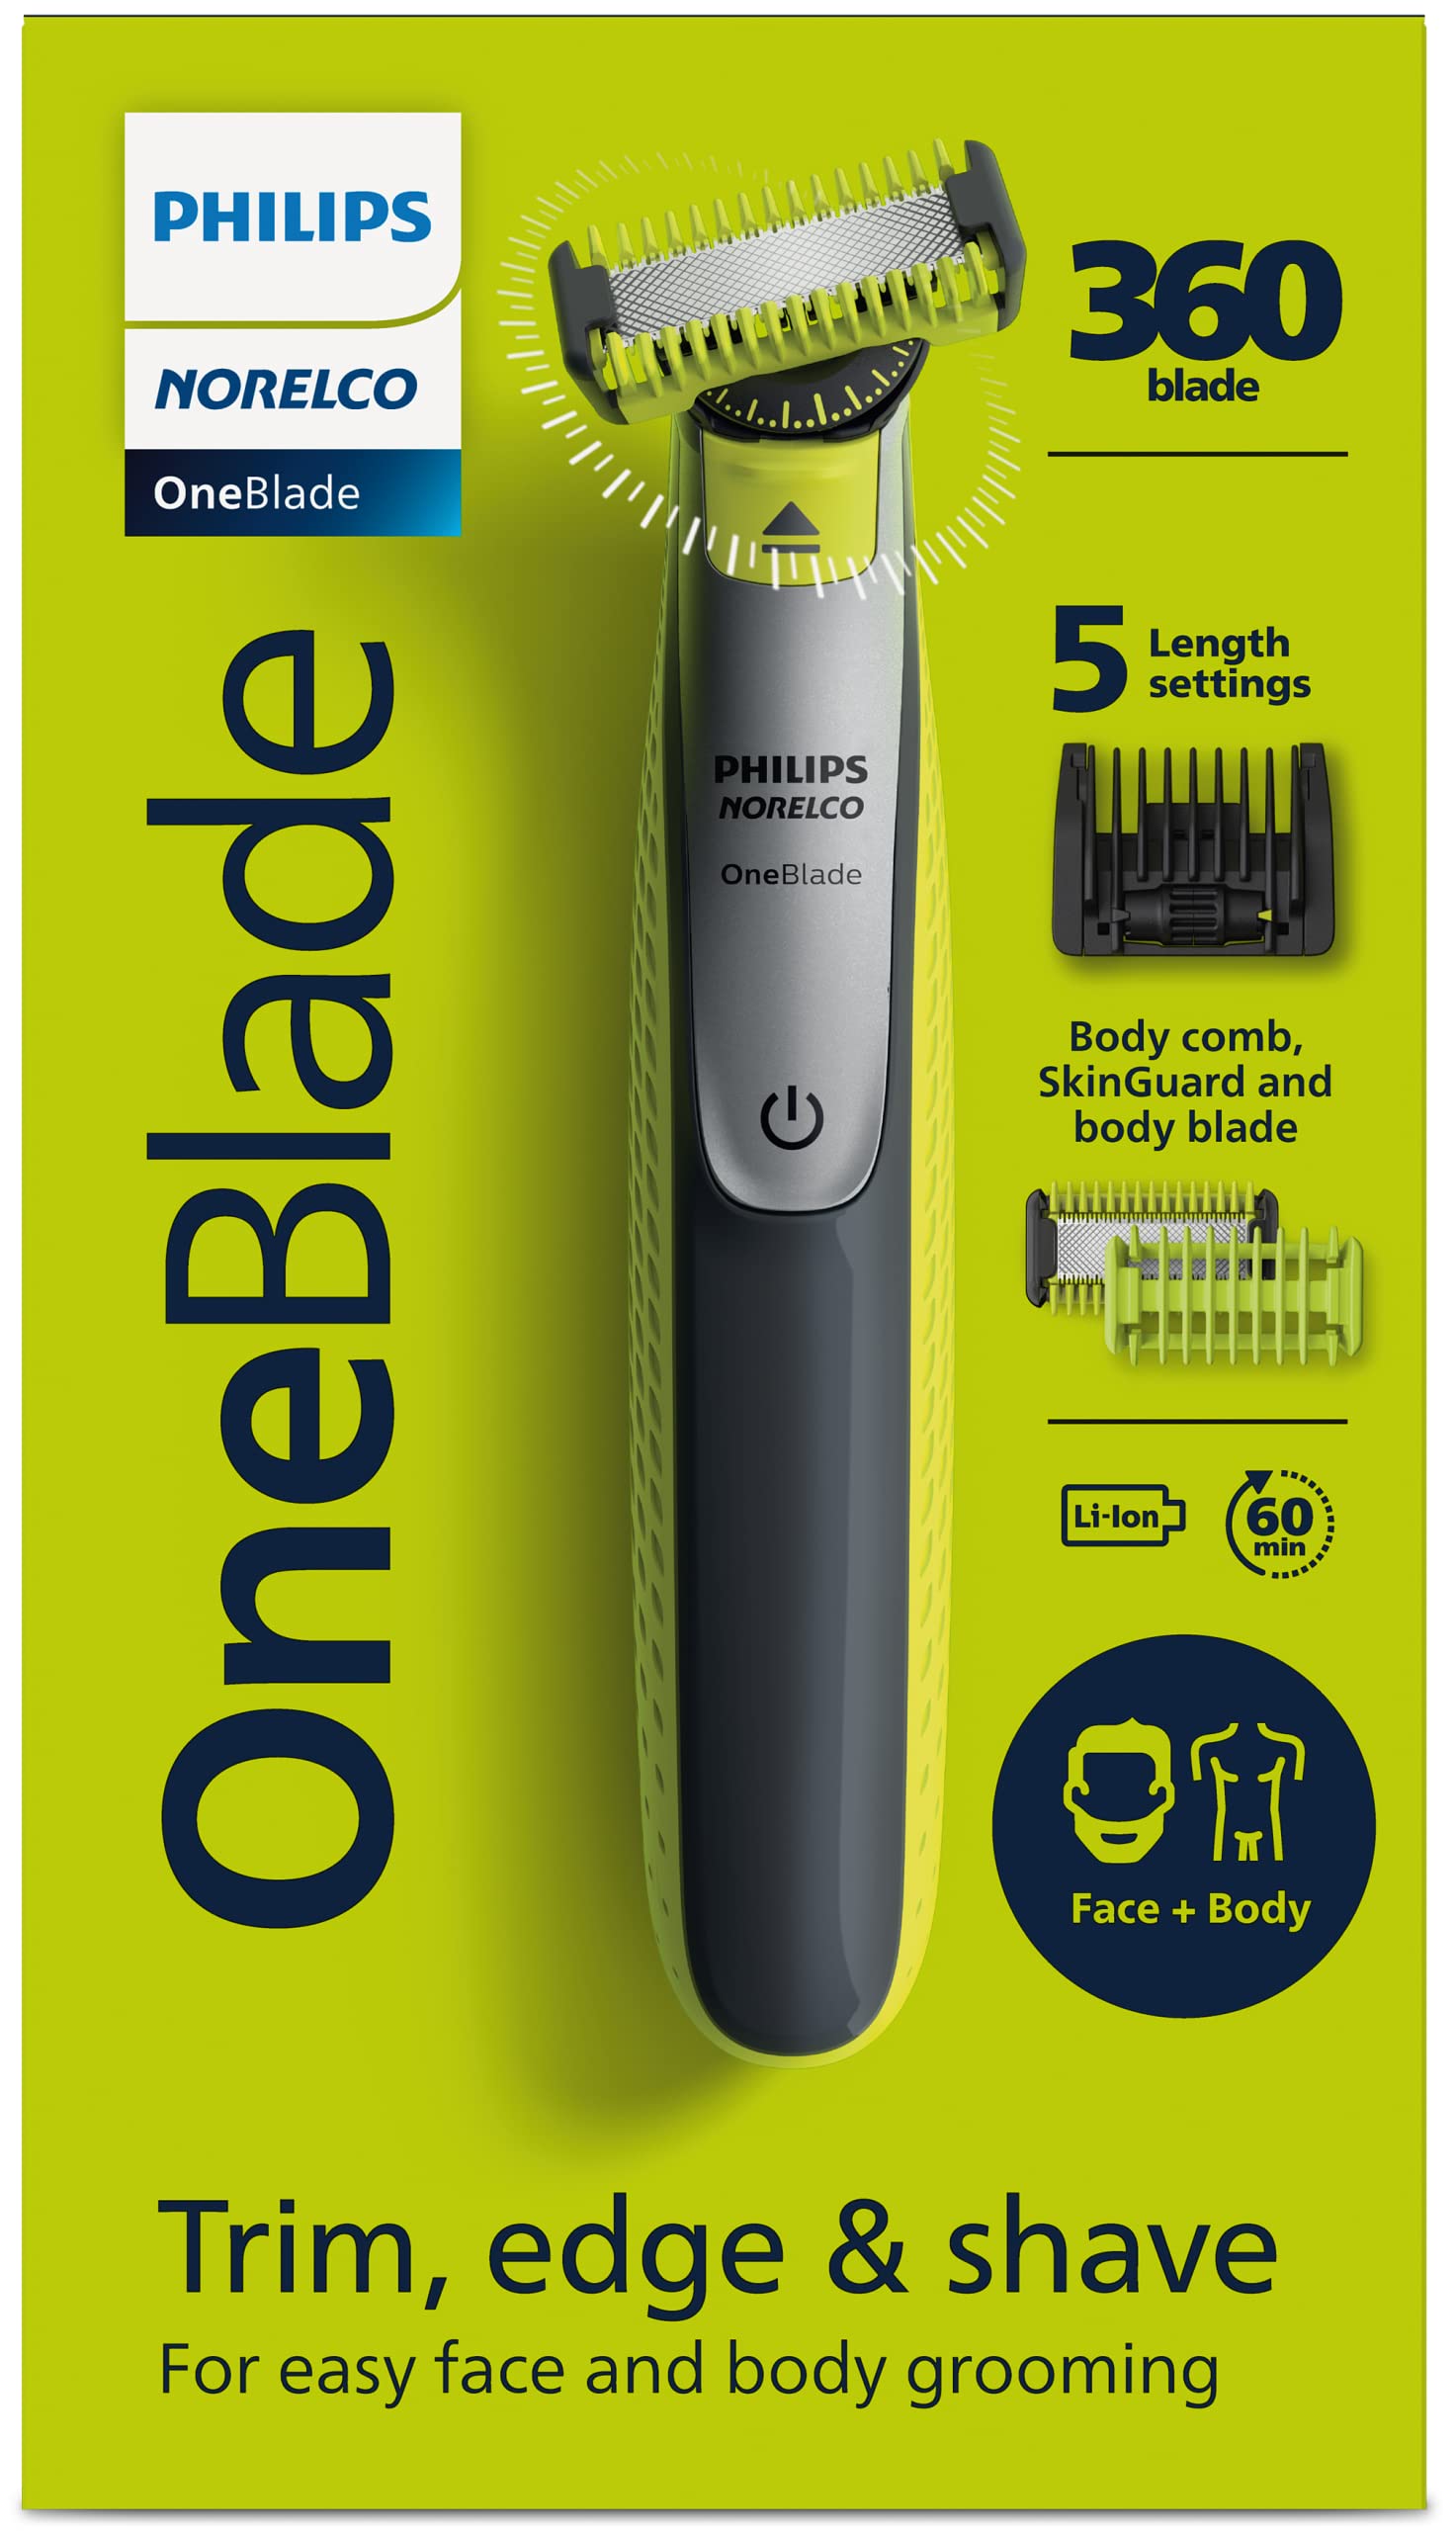 Philips Norelco OneBlade 360 Face + Body Hybrid Electric Trimmer and Shaver, QP2834/70